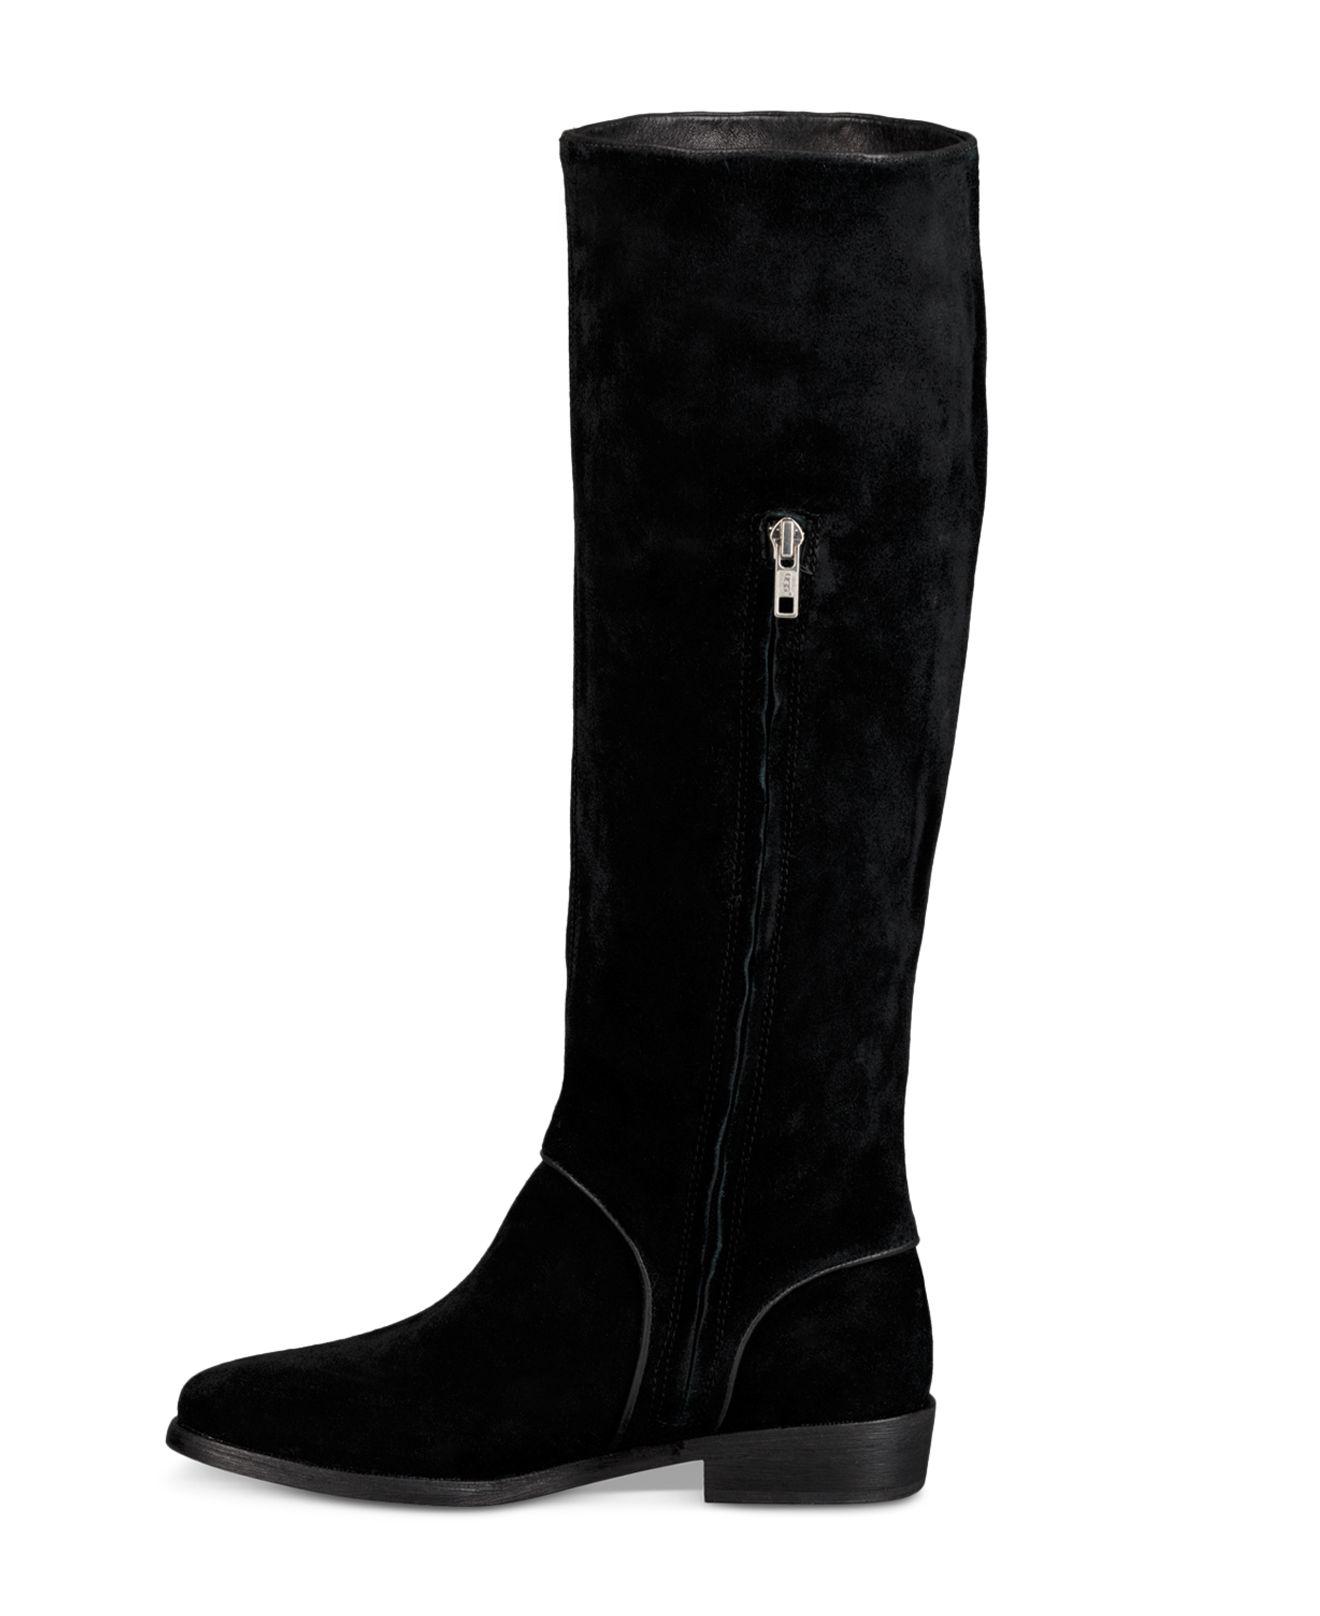 UGG Gracen Suede Riding Boots in Black - Lyst